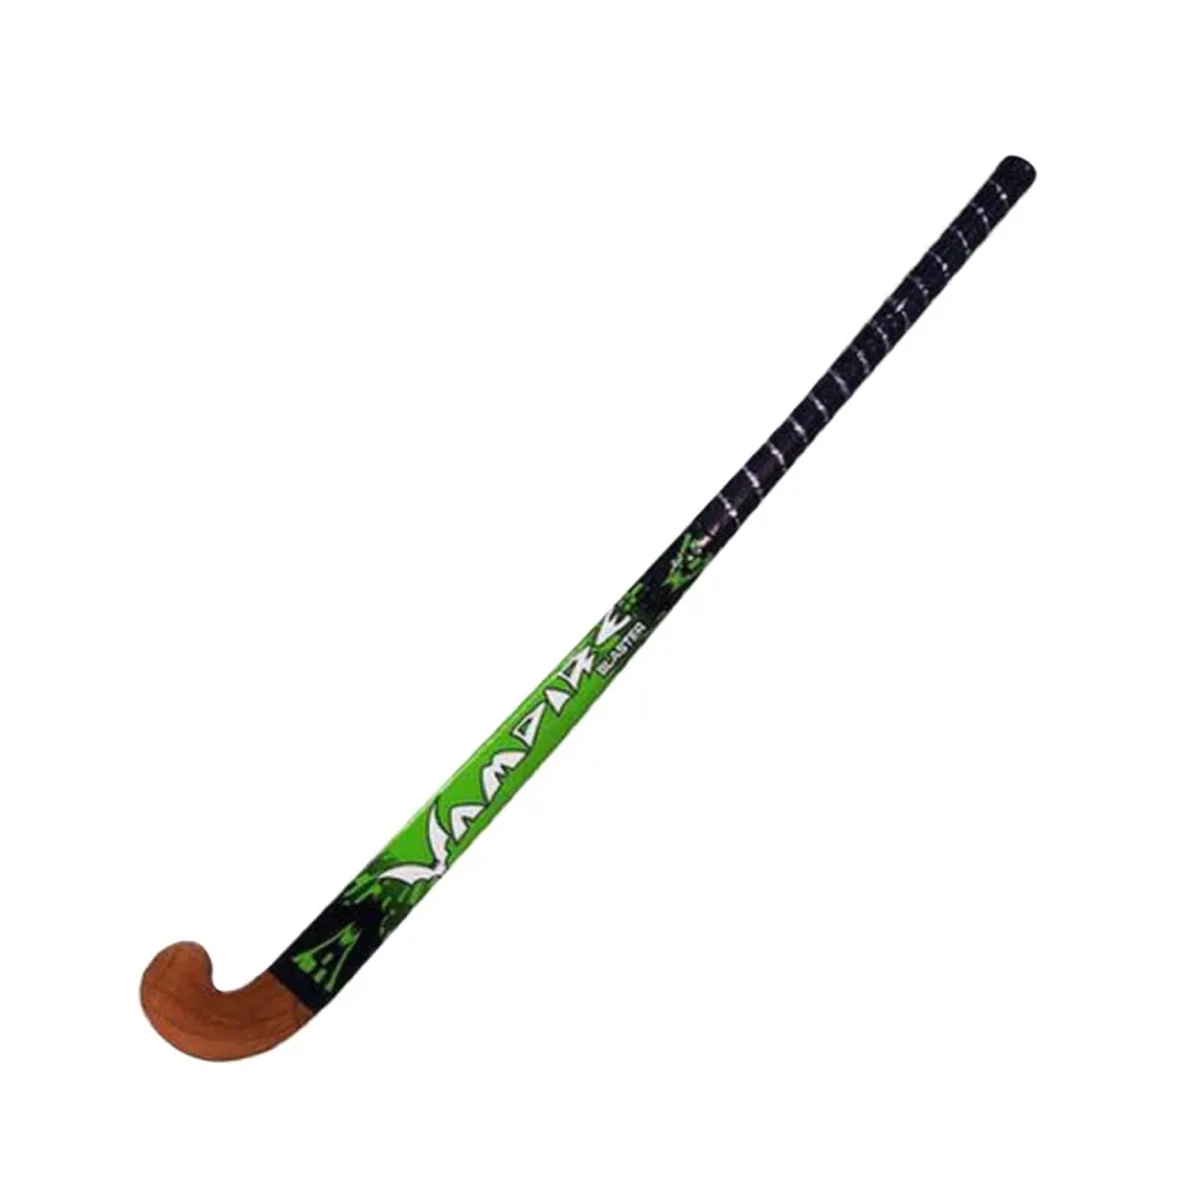 HOKEY STICK ,,BEST QUALITY ,,SAFTY AND PLAYING,,VERY CHEAP PRICE